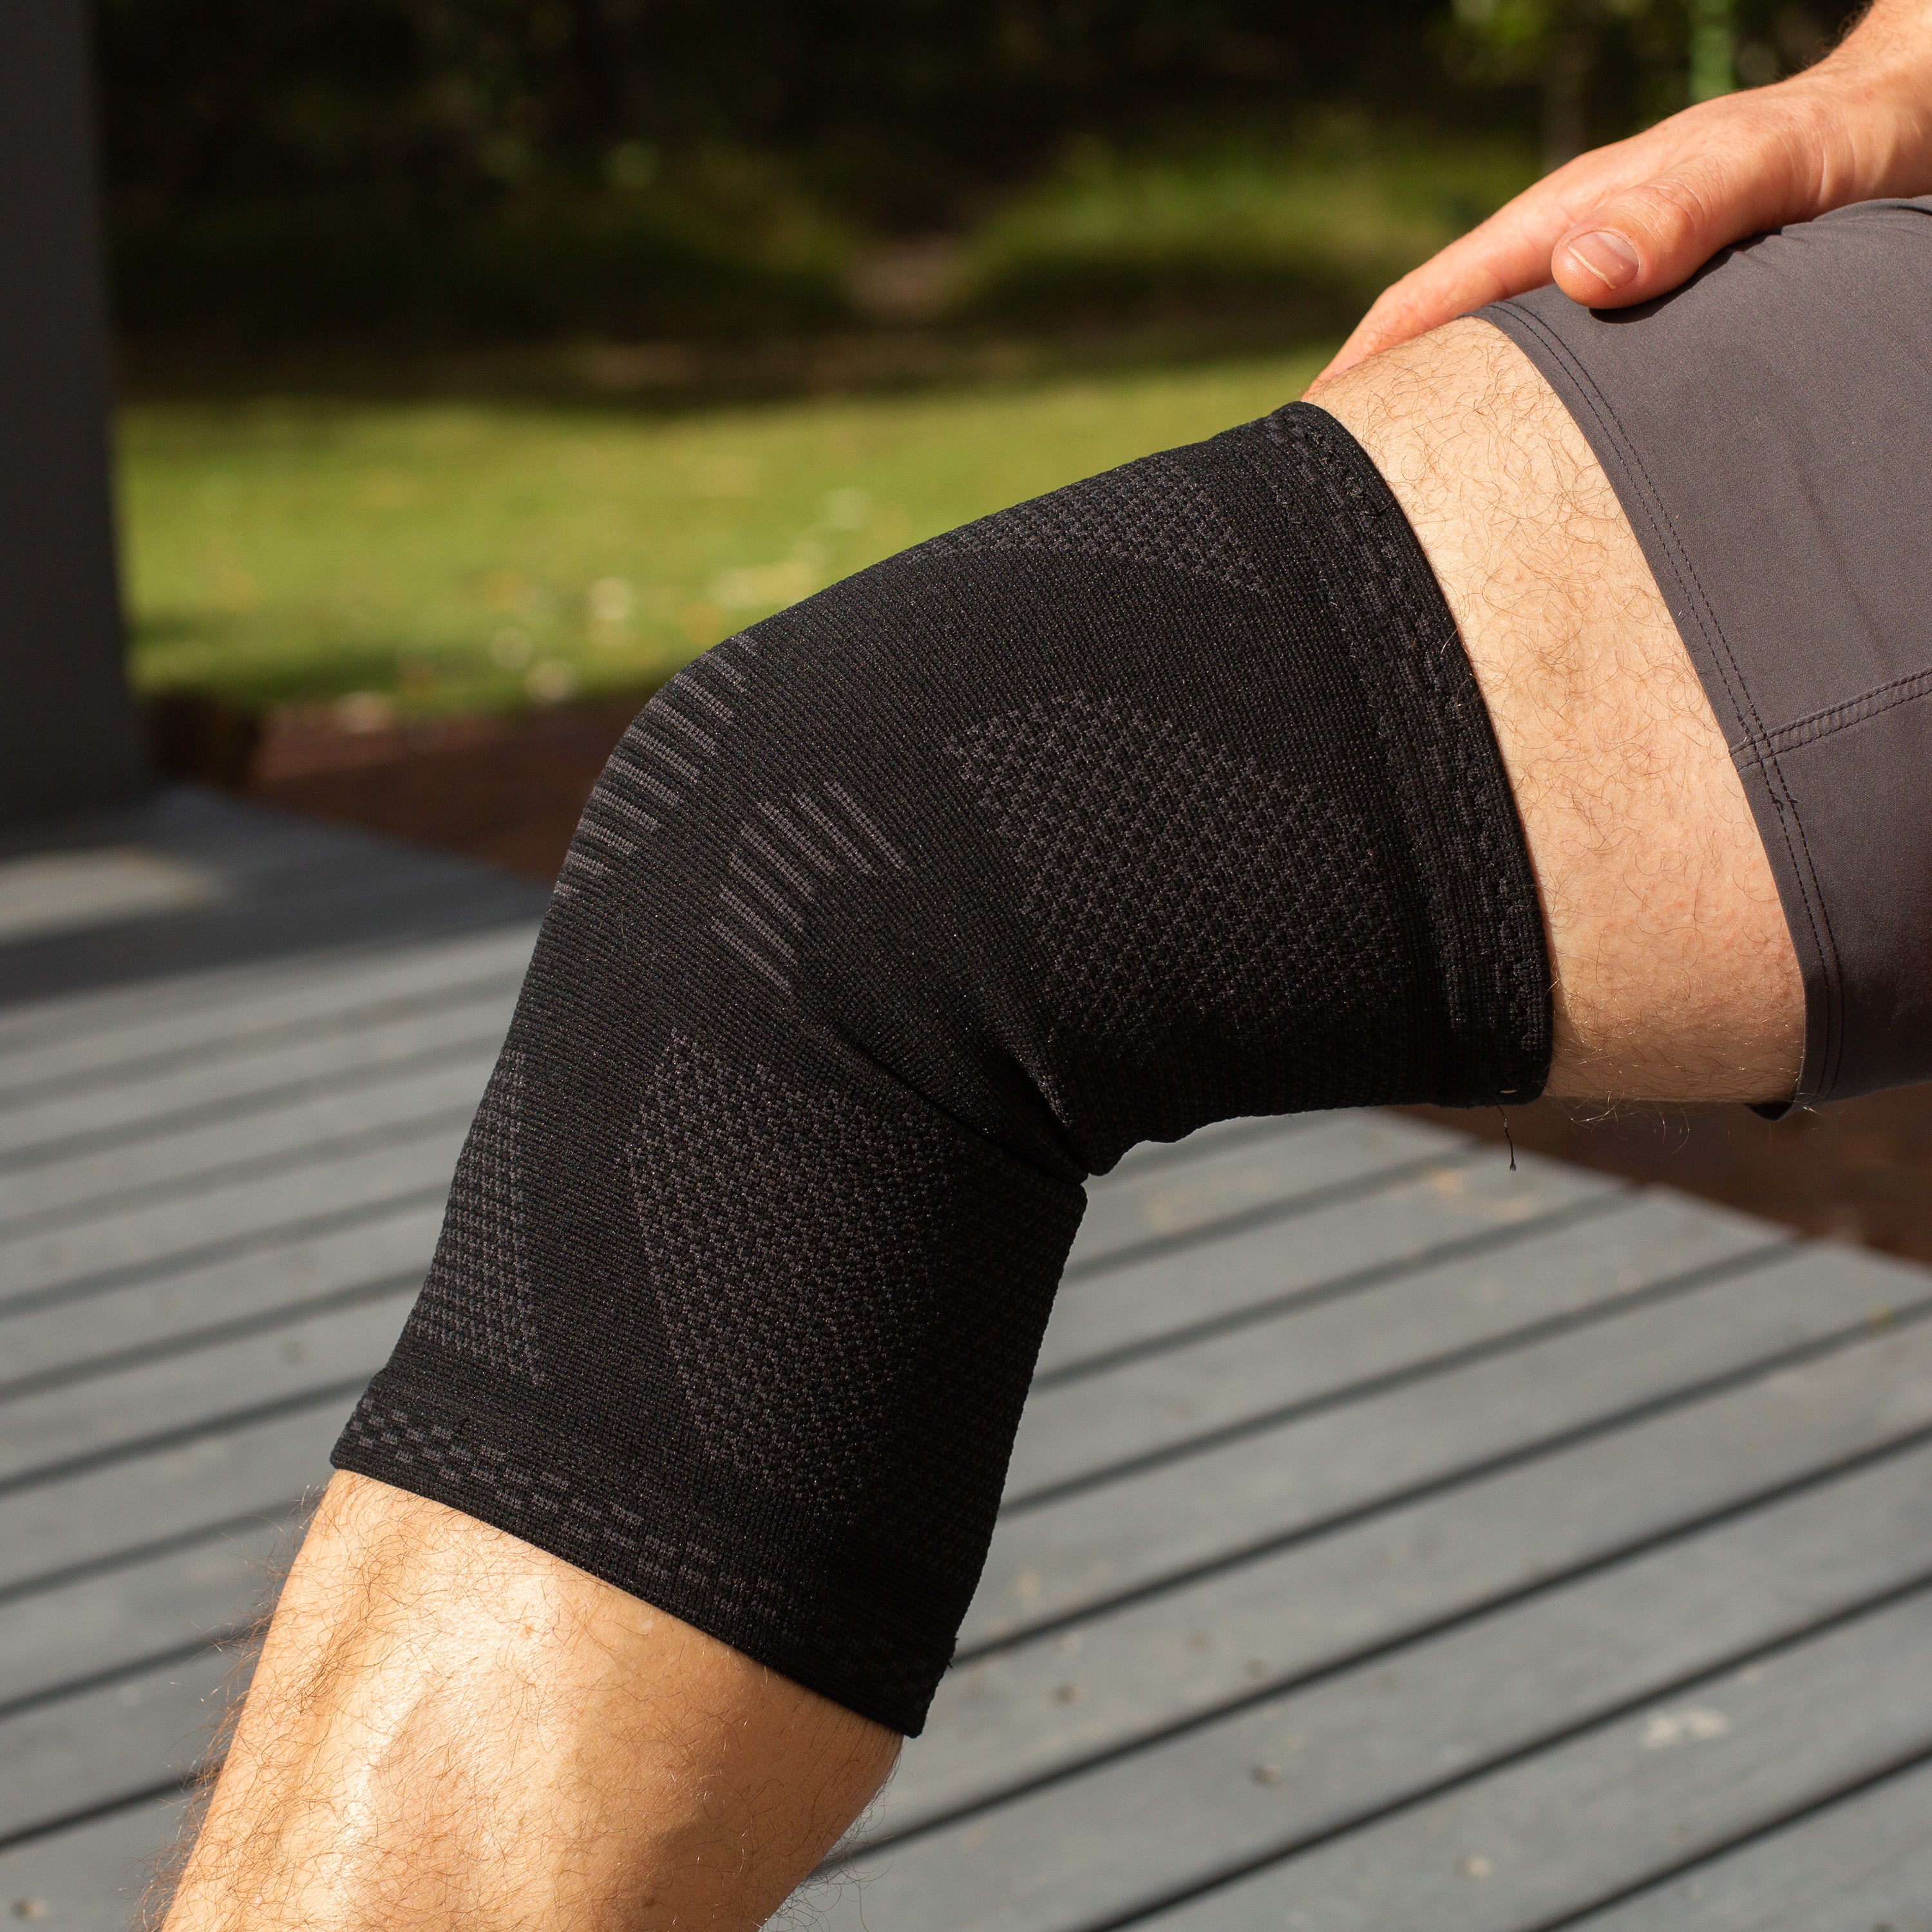 Bending the knee with compression sleeve